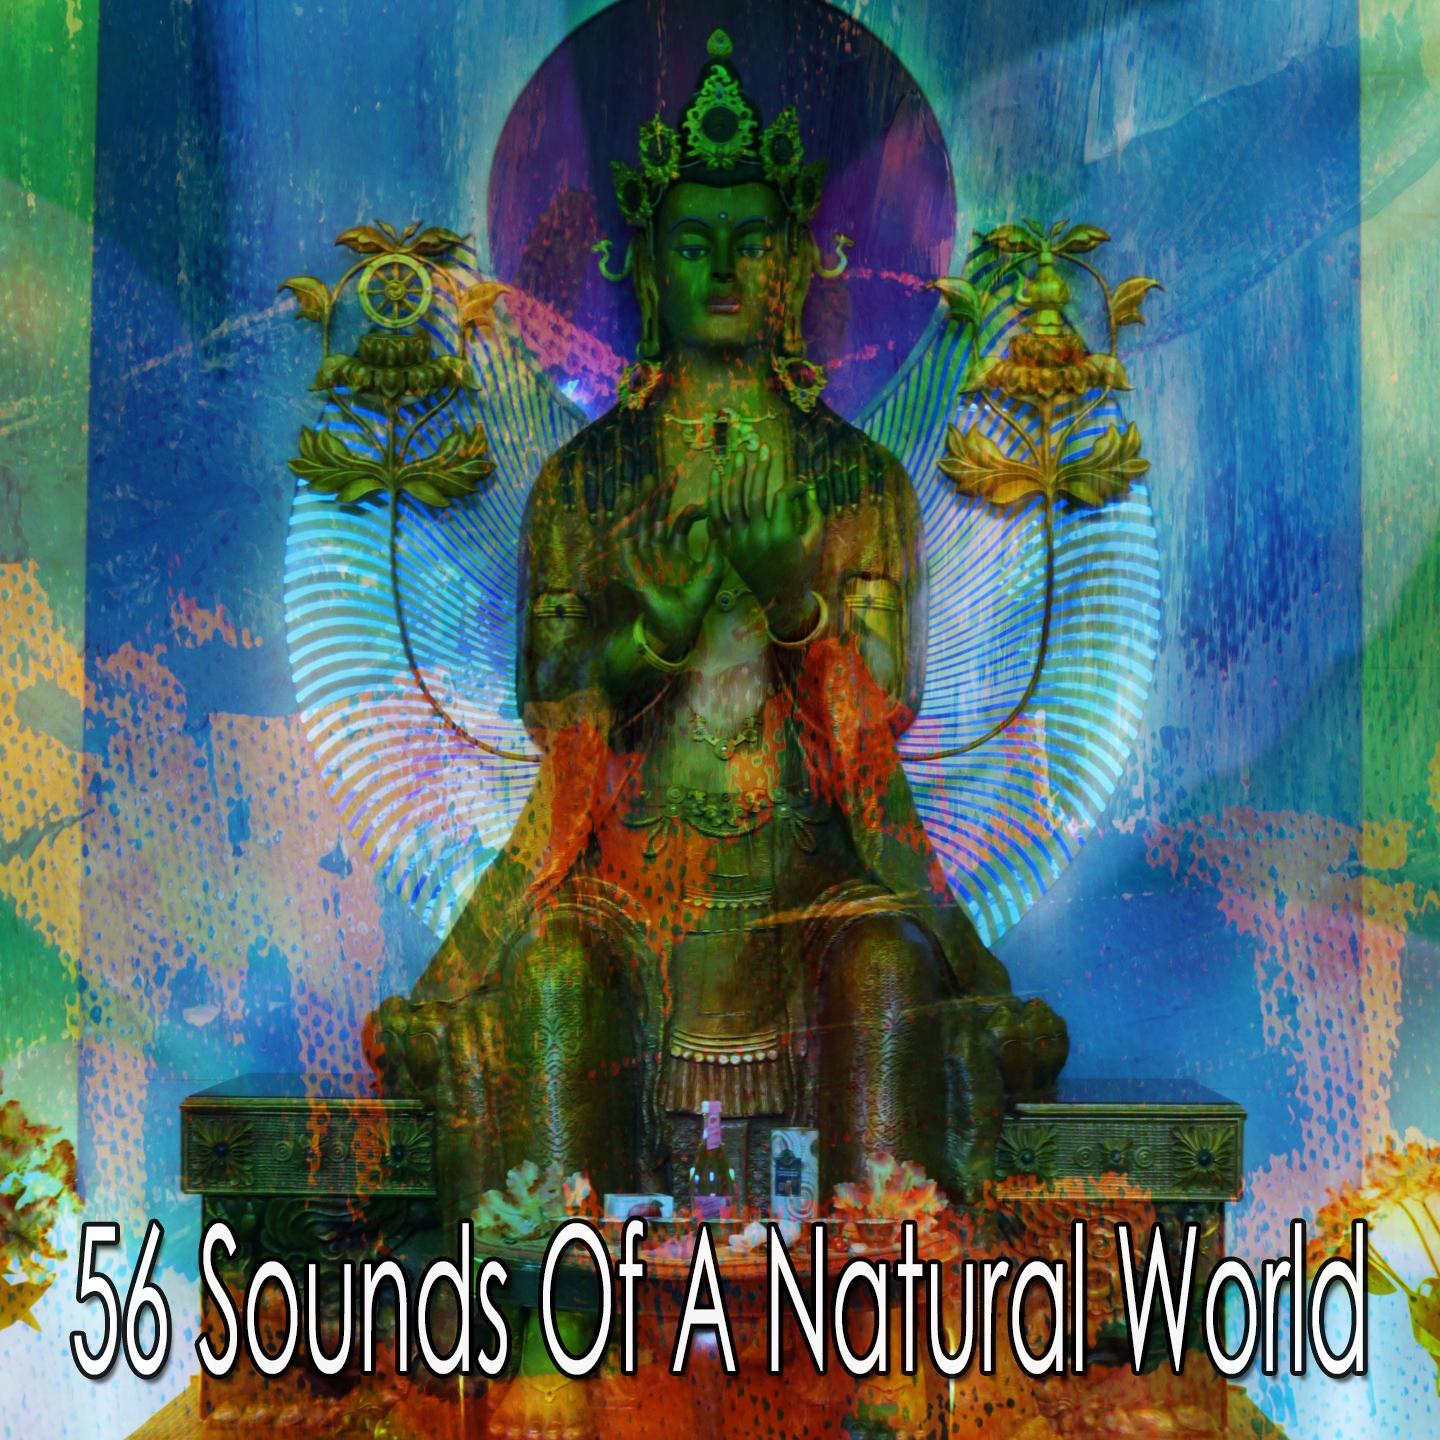 56 Sounds of a Natural World